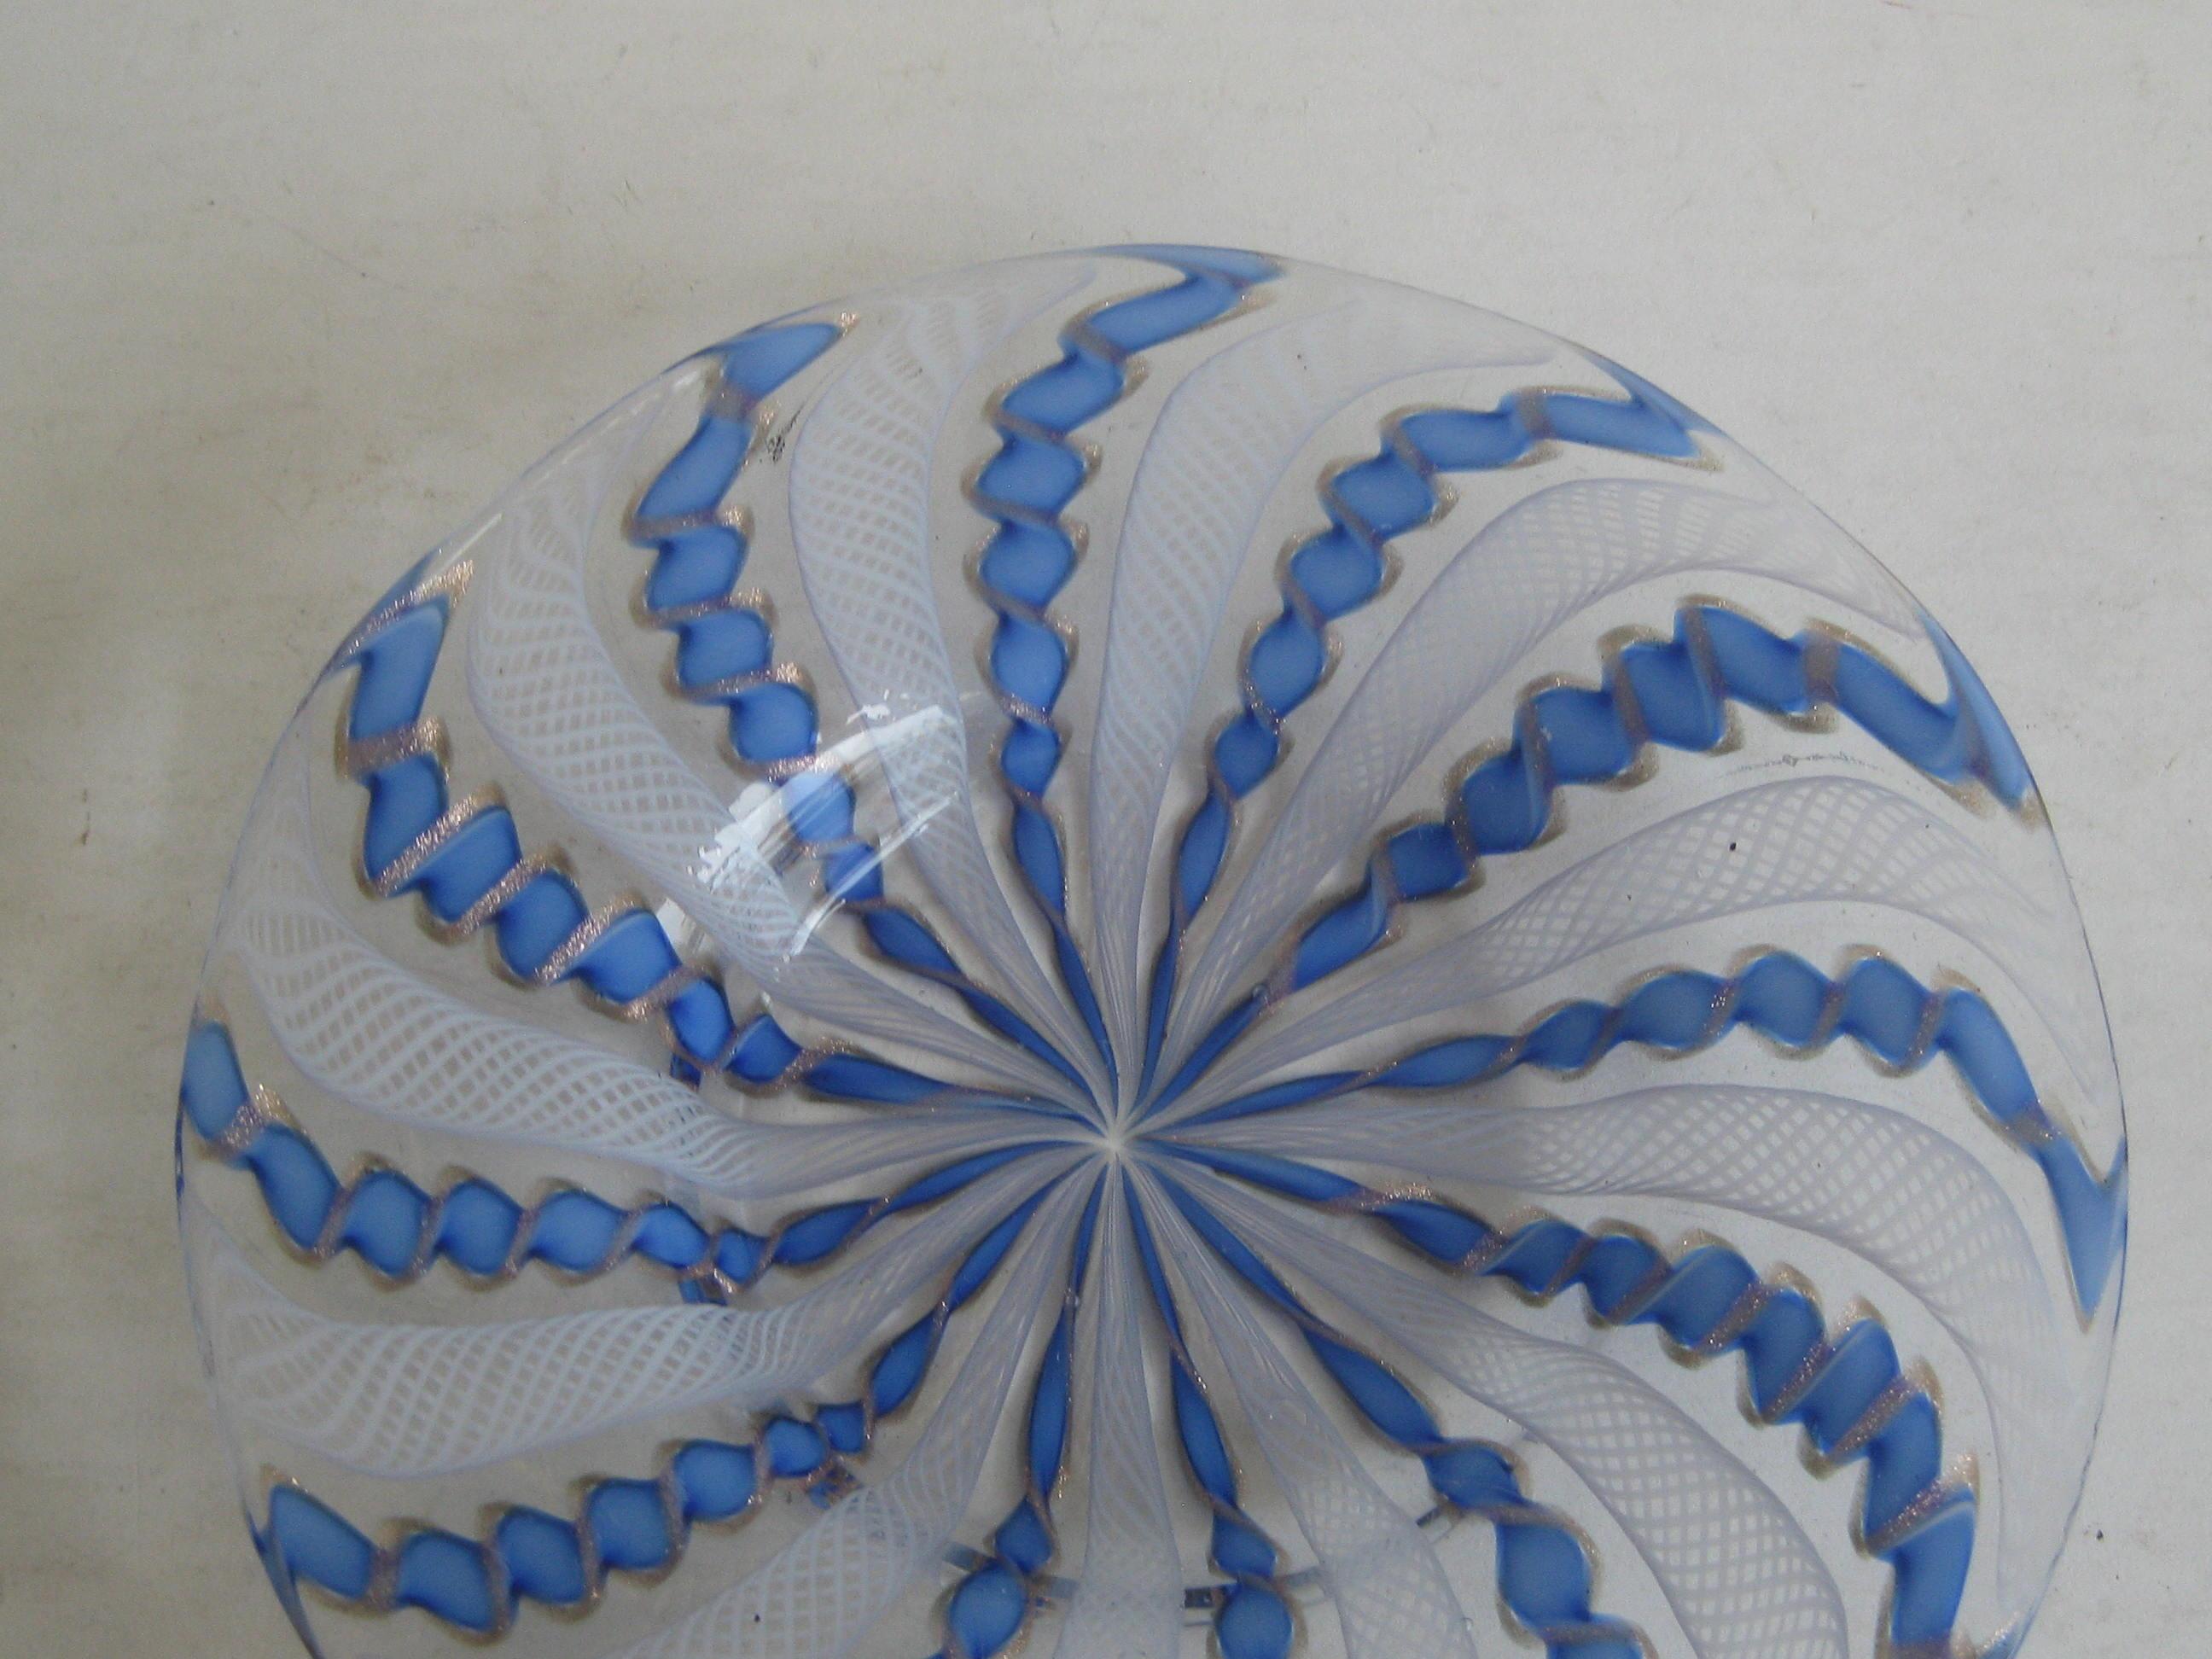 Very nice Murano Venetian art glass ribbon latticino candy dish or bowl. Colors are white, blue and gold flex. In great original condition. No chips, no cracks and no repairs. Measures approx. 5